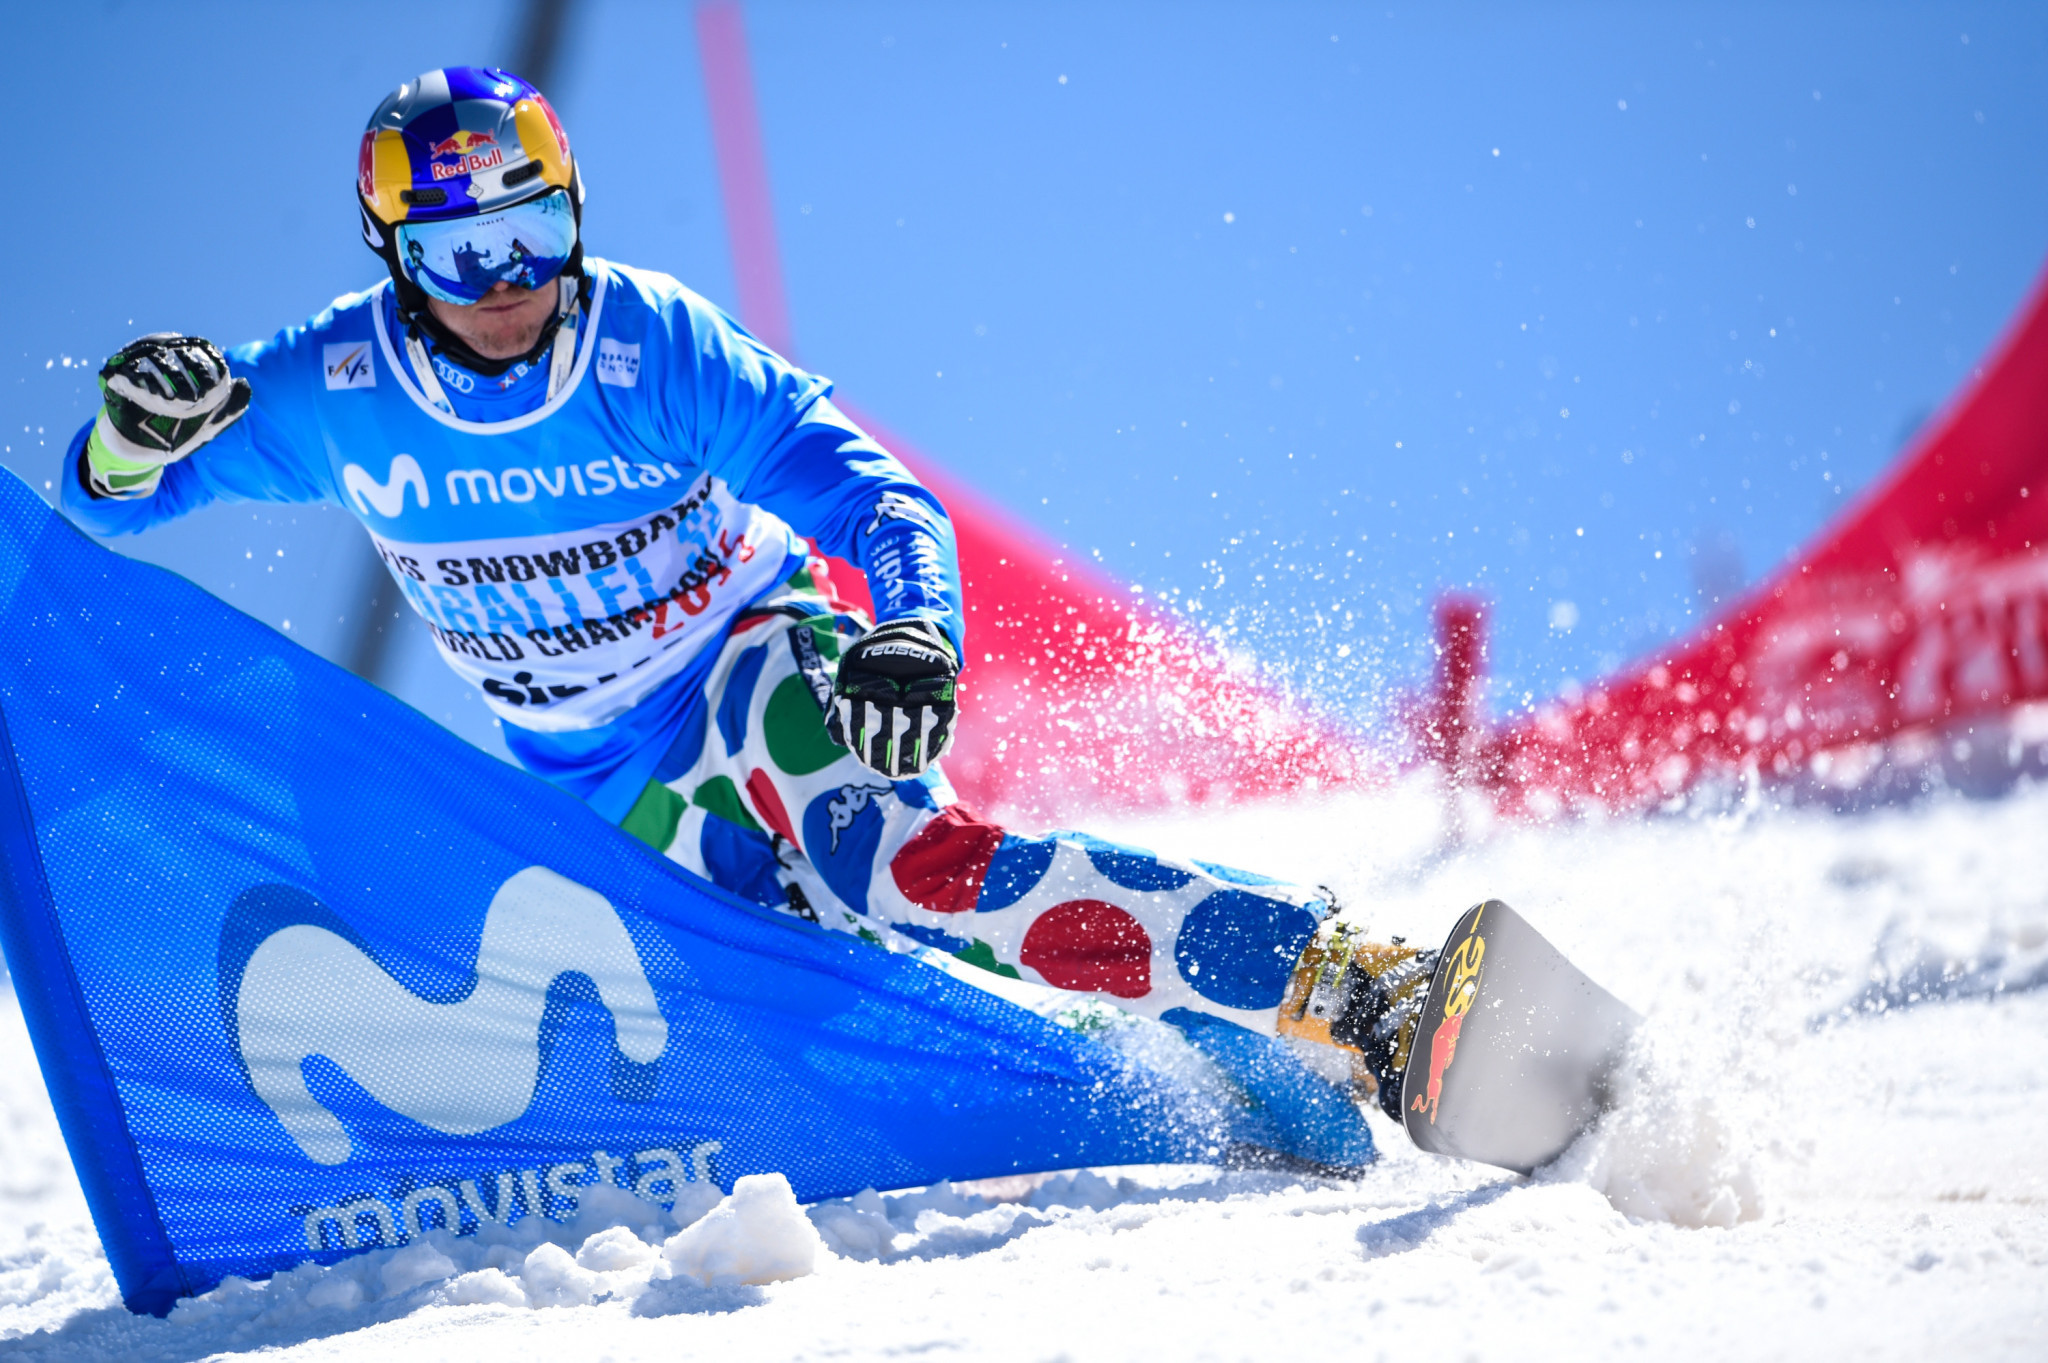 Roland Fischnaller won on home snow in today's Snowboard World Cup action ©Getty Images